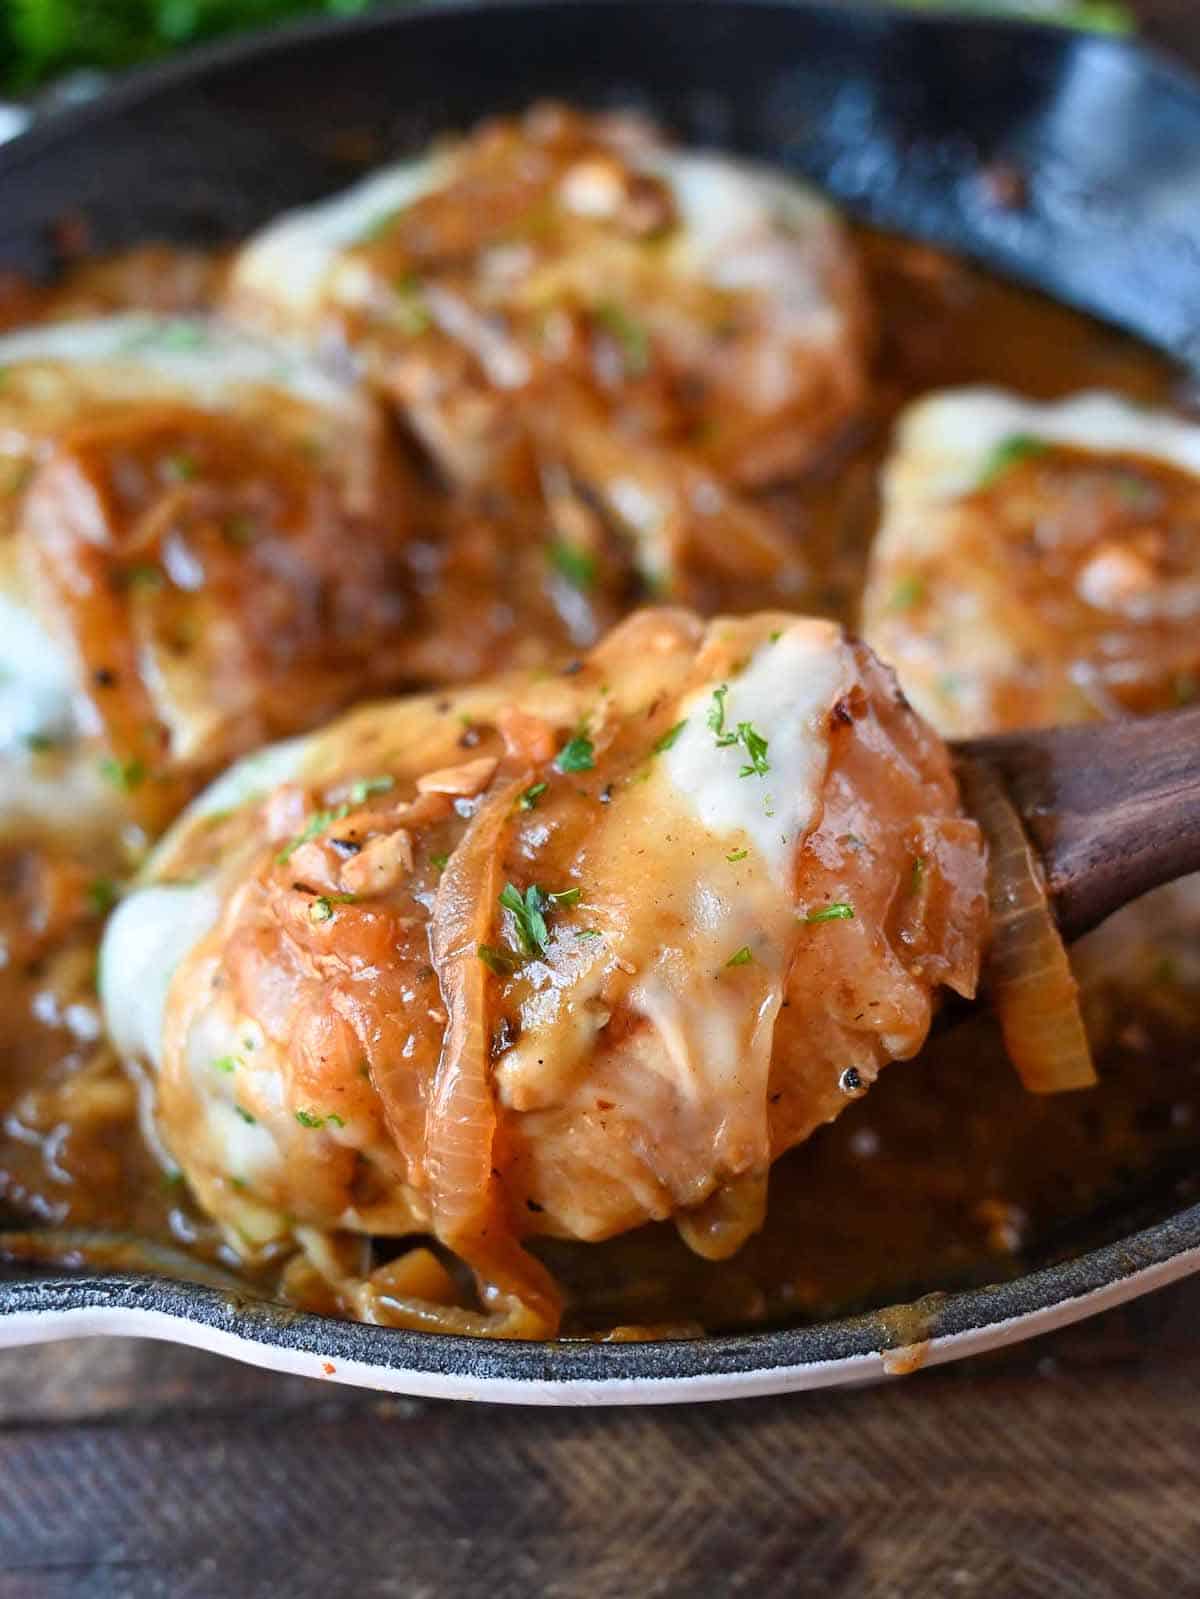 Pork chops in a skillet smothered in a french onion gravy.